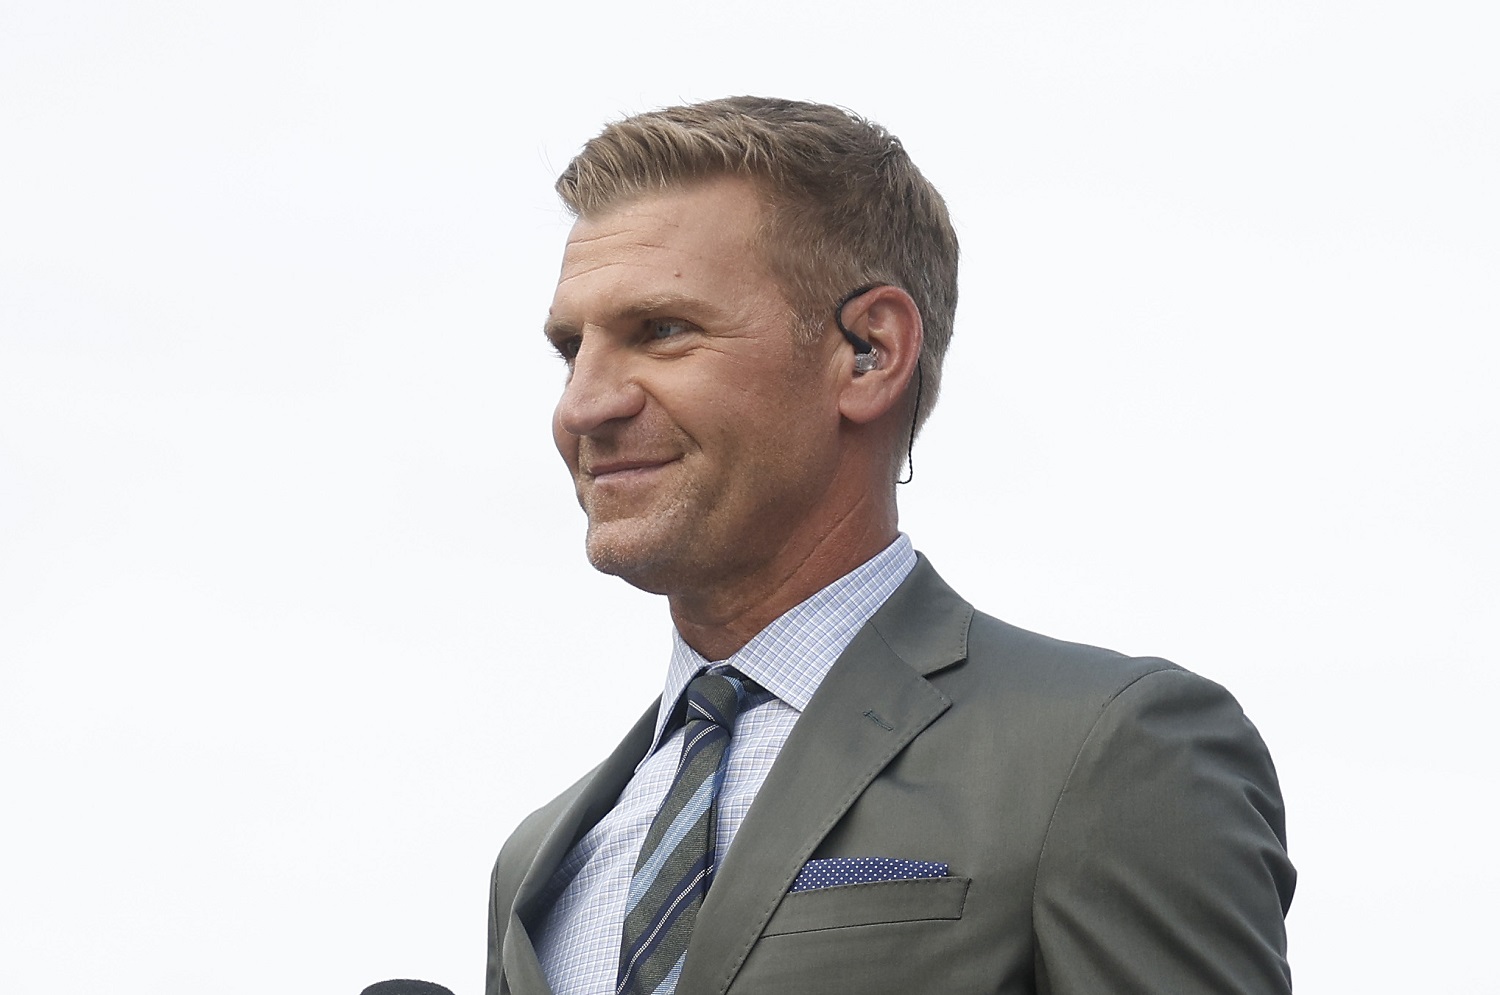 Fox Sports NASCAR broadcaster Clint Bowyer during pre-race ceremonies at the Cup Series All-Star Race at Texas Motor Speedway on May 22, 2022.